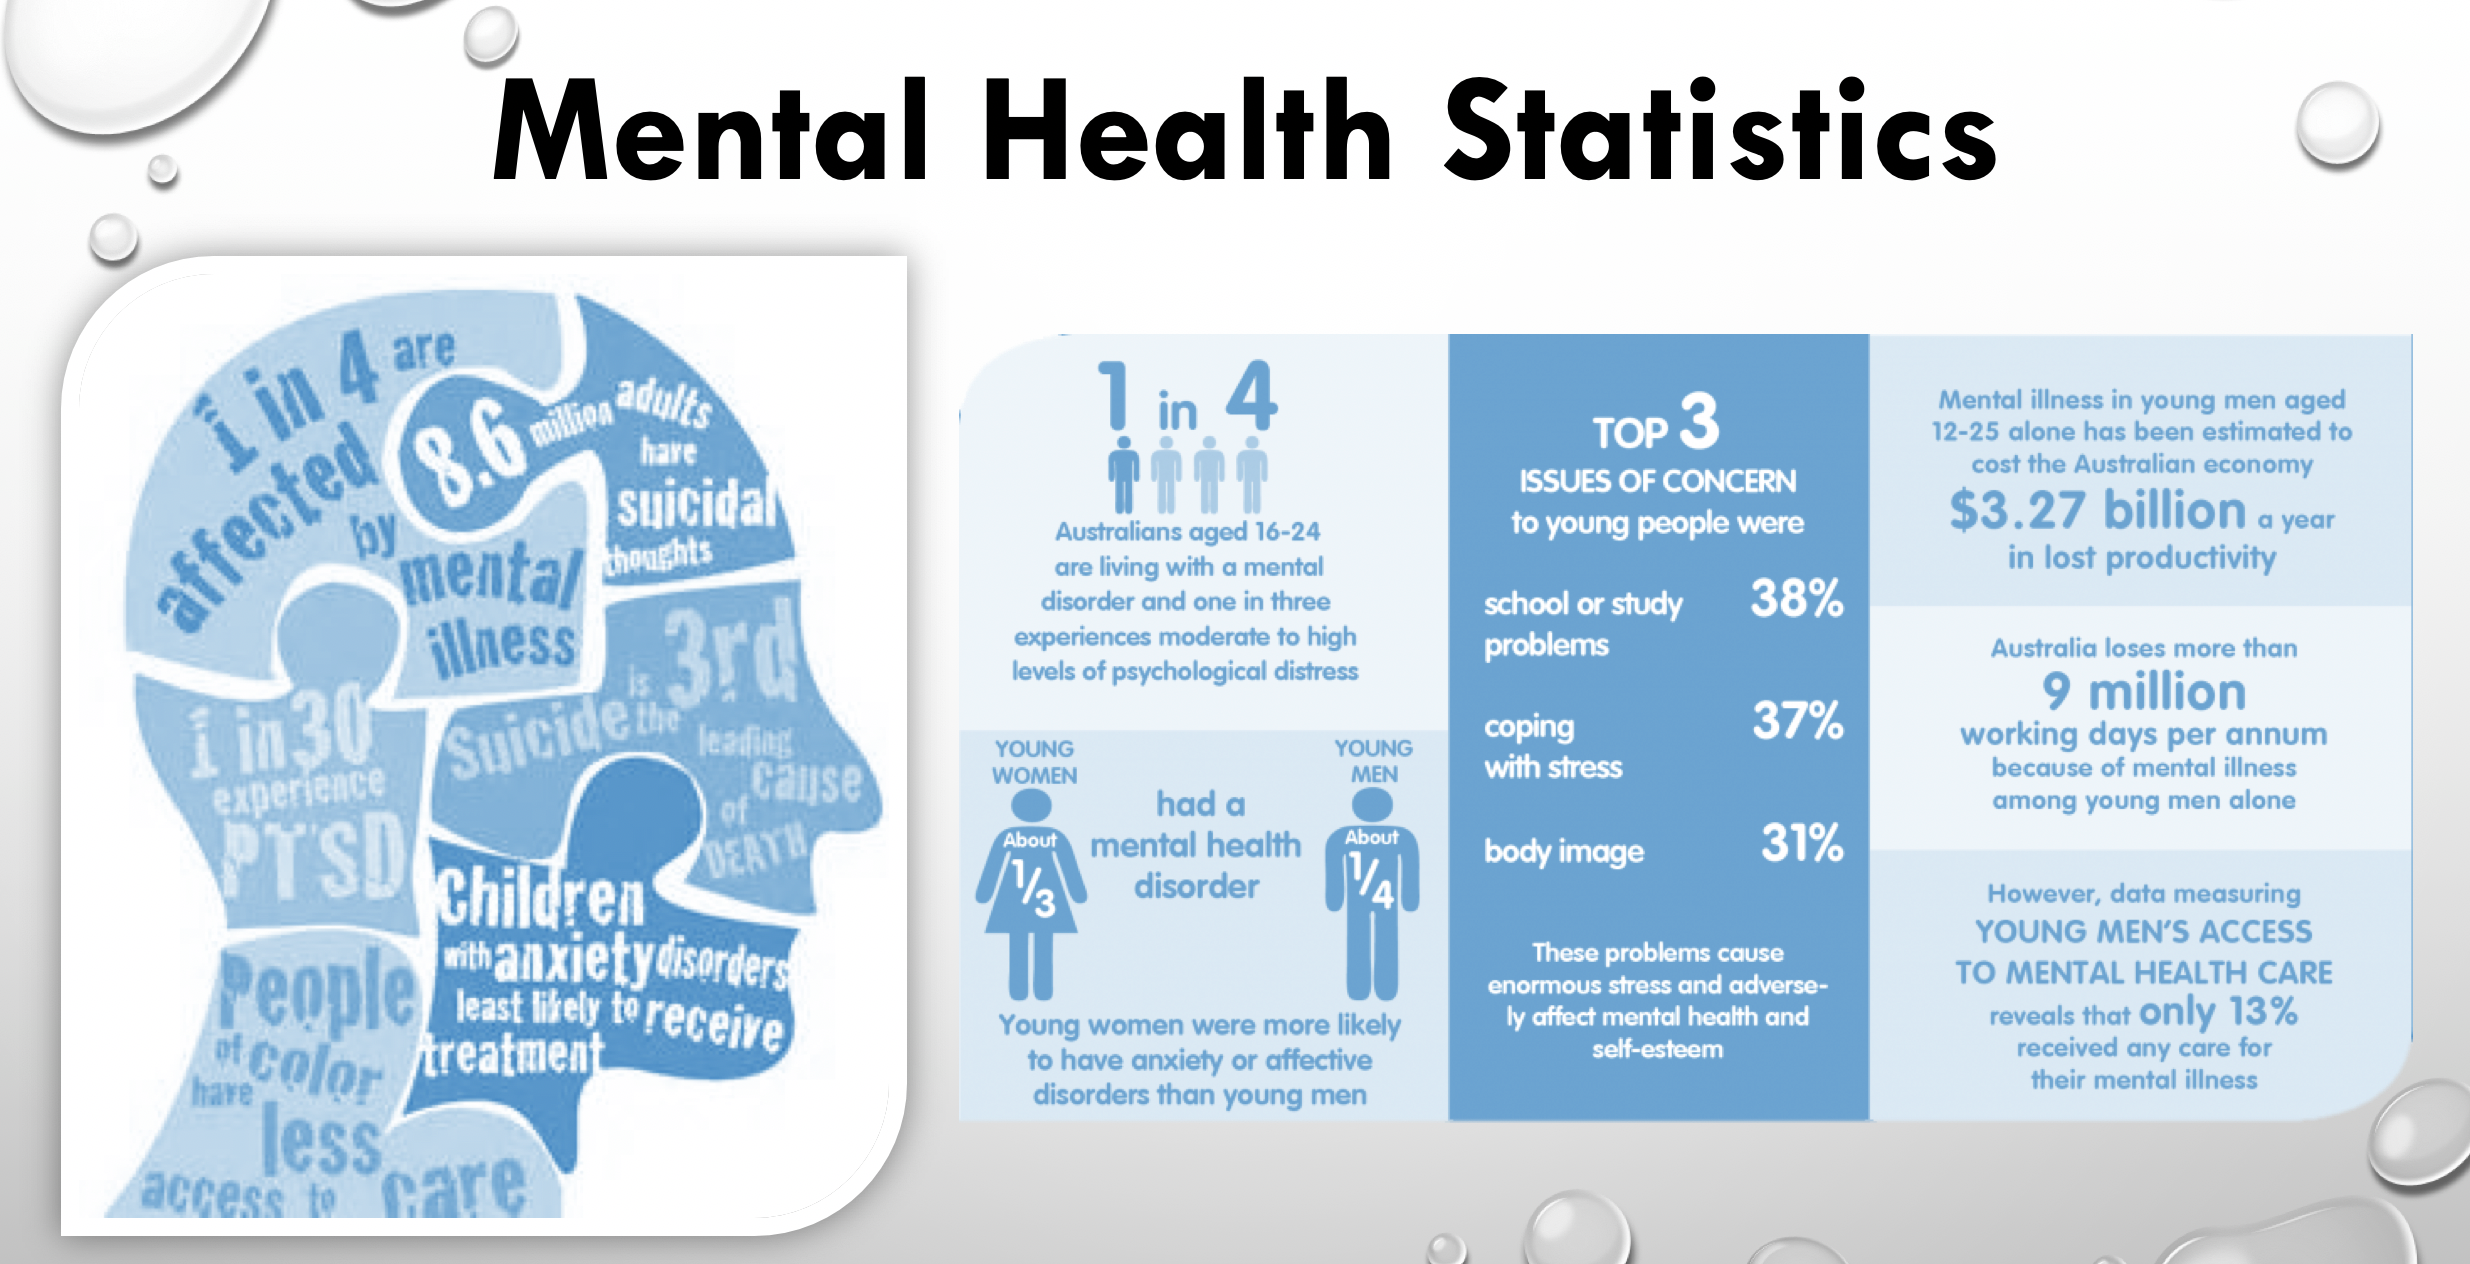 Mental health statistics in Australia, indicating this is a serious issue for youth and it needs to be addressed.